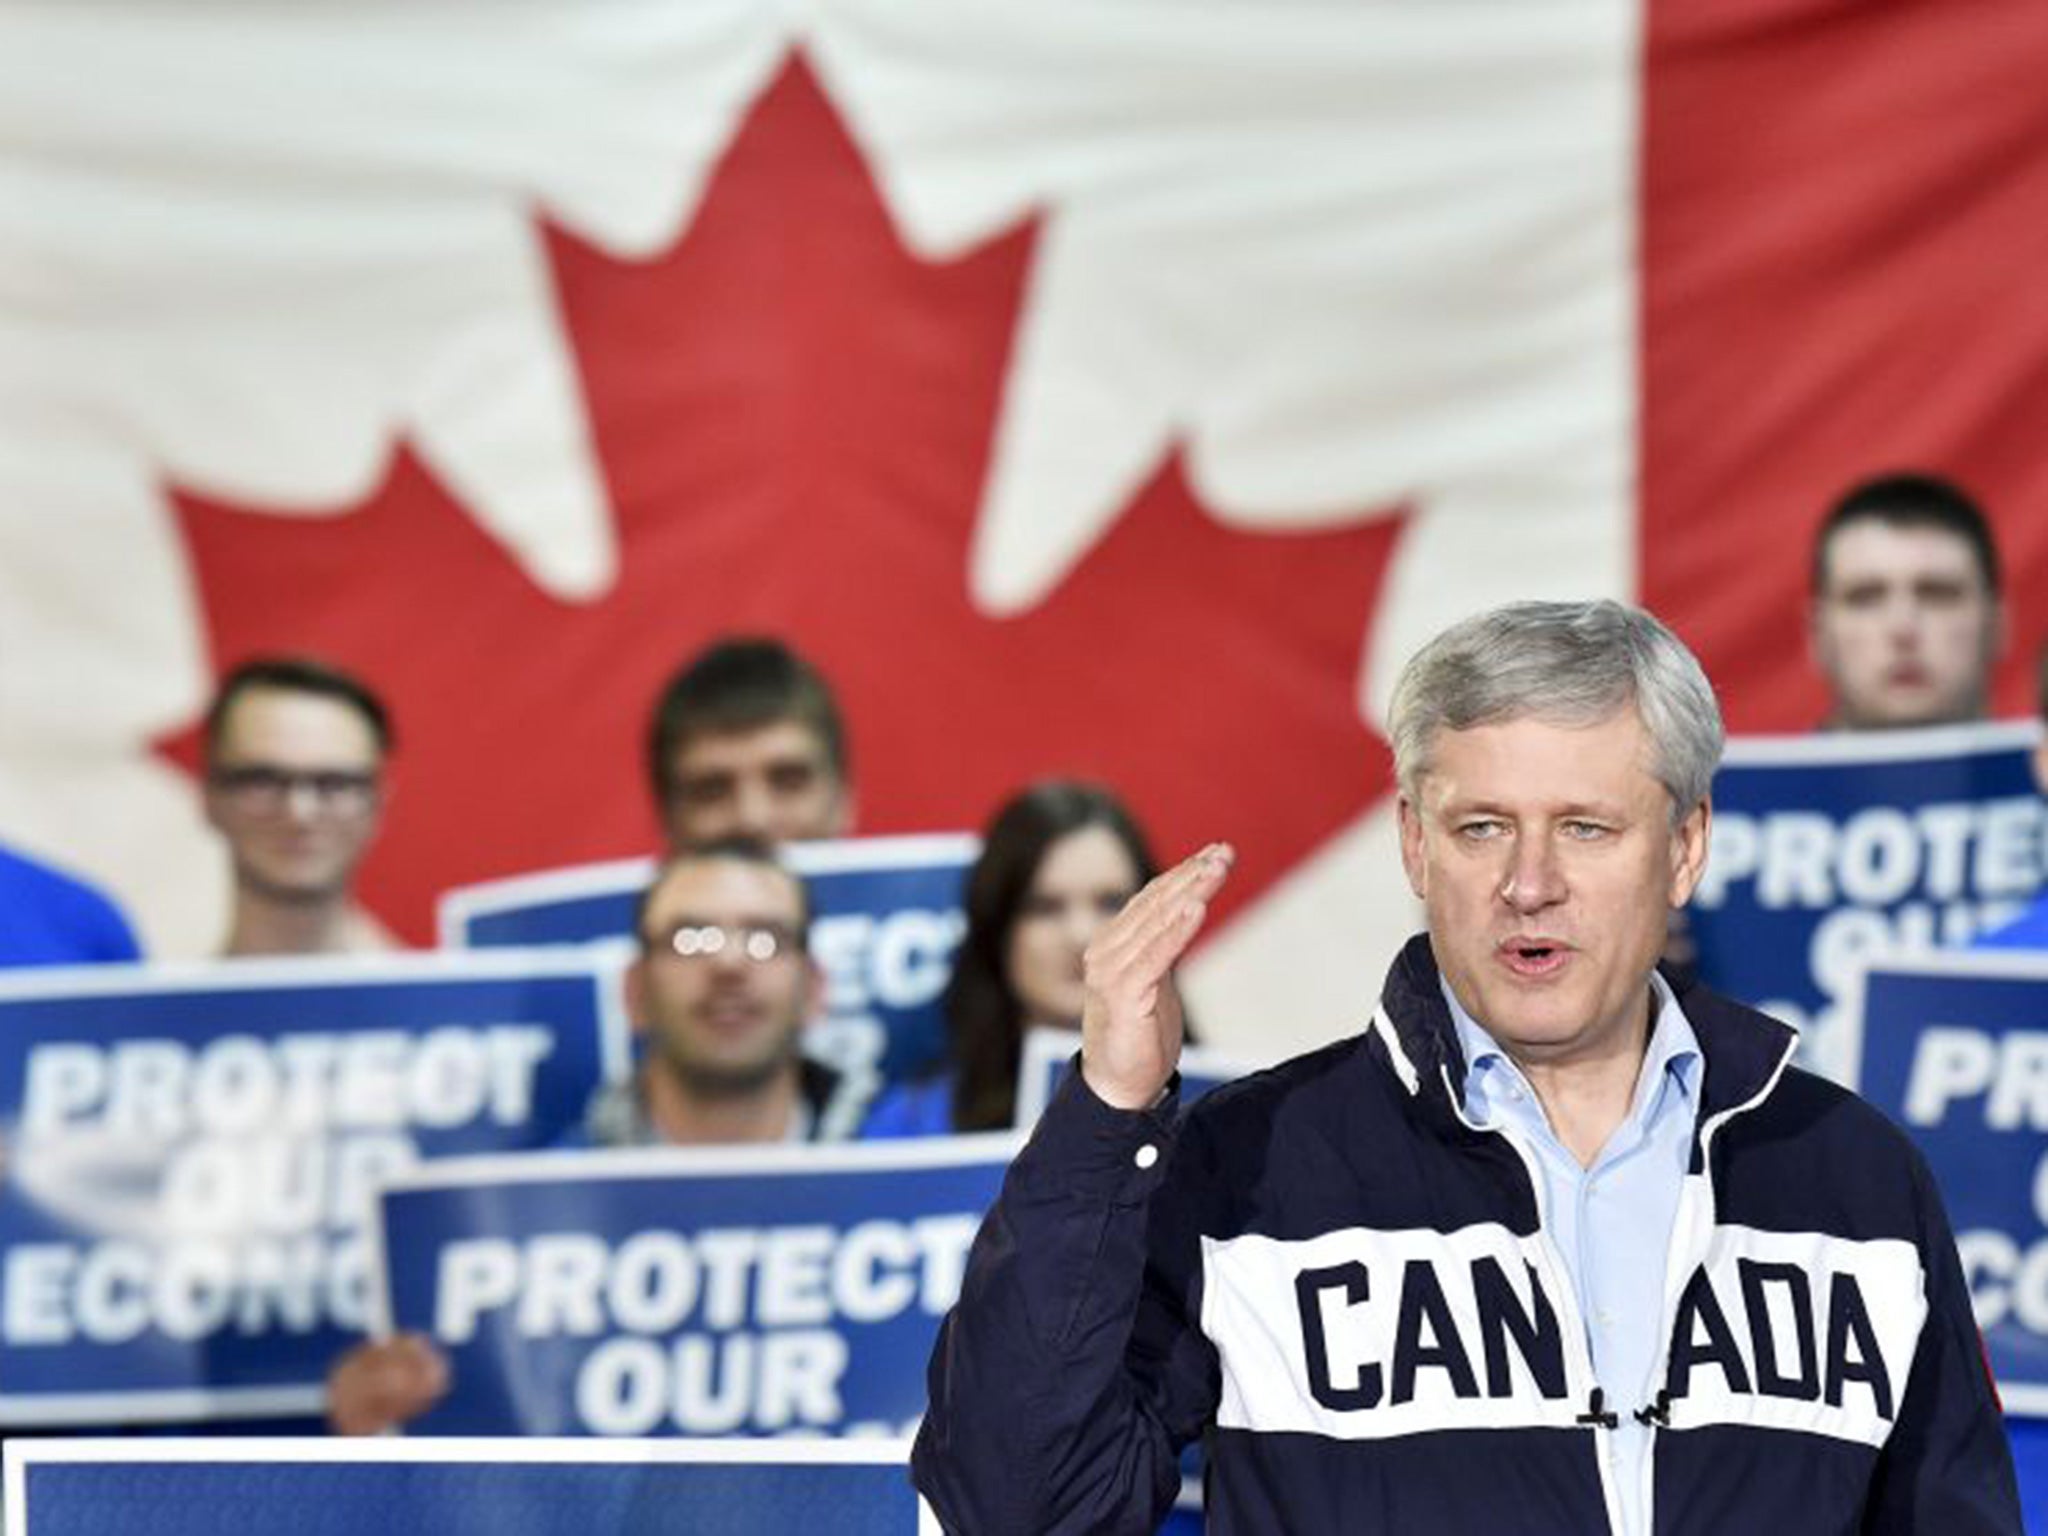 Conservative leader Stephen Harper speaks at a rally during a campaign stop in Bay Robert's